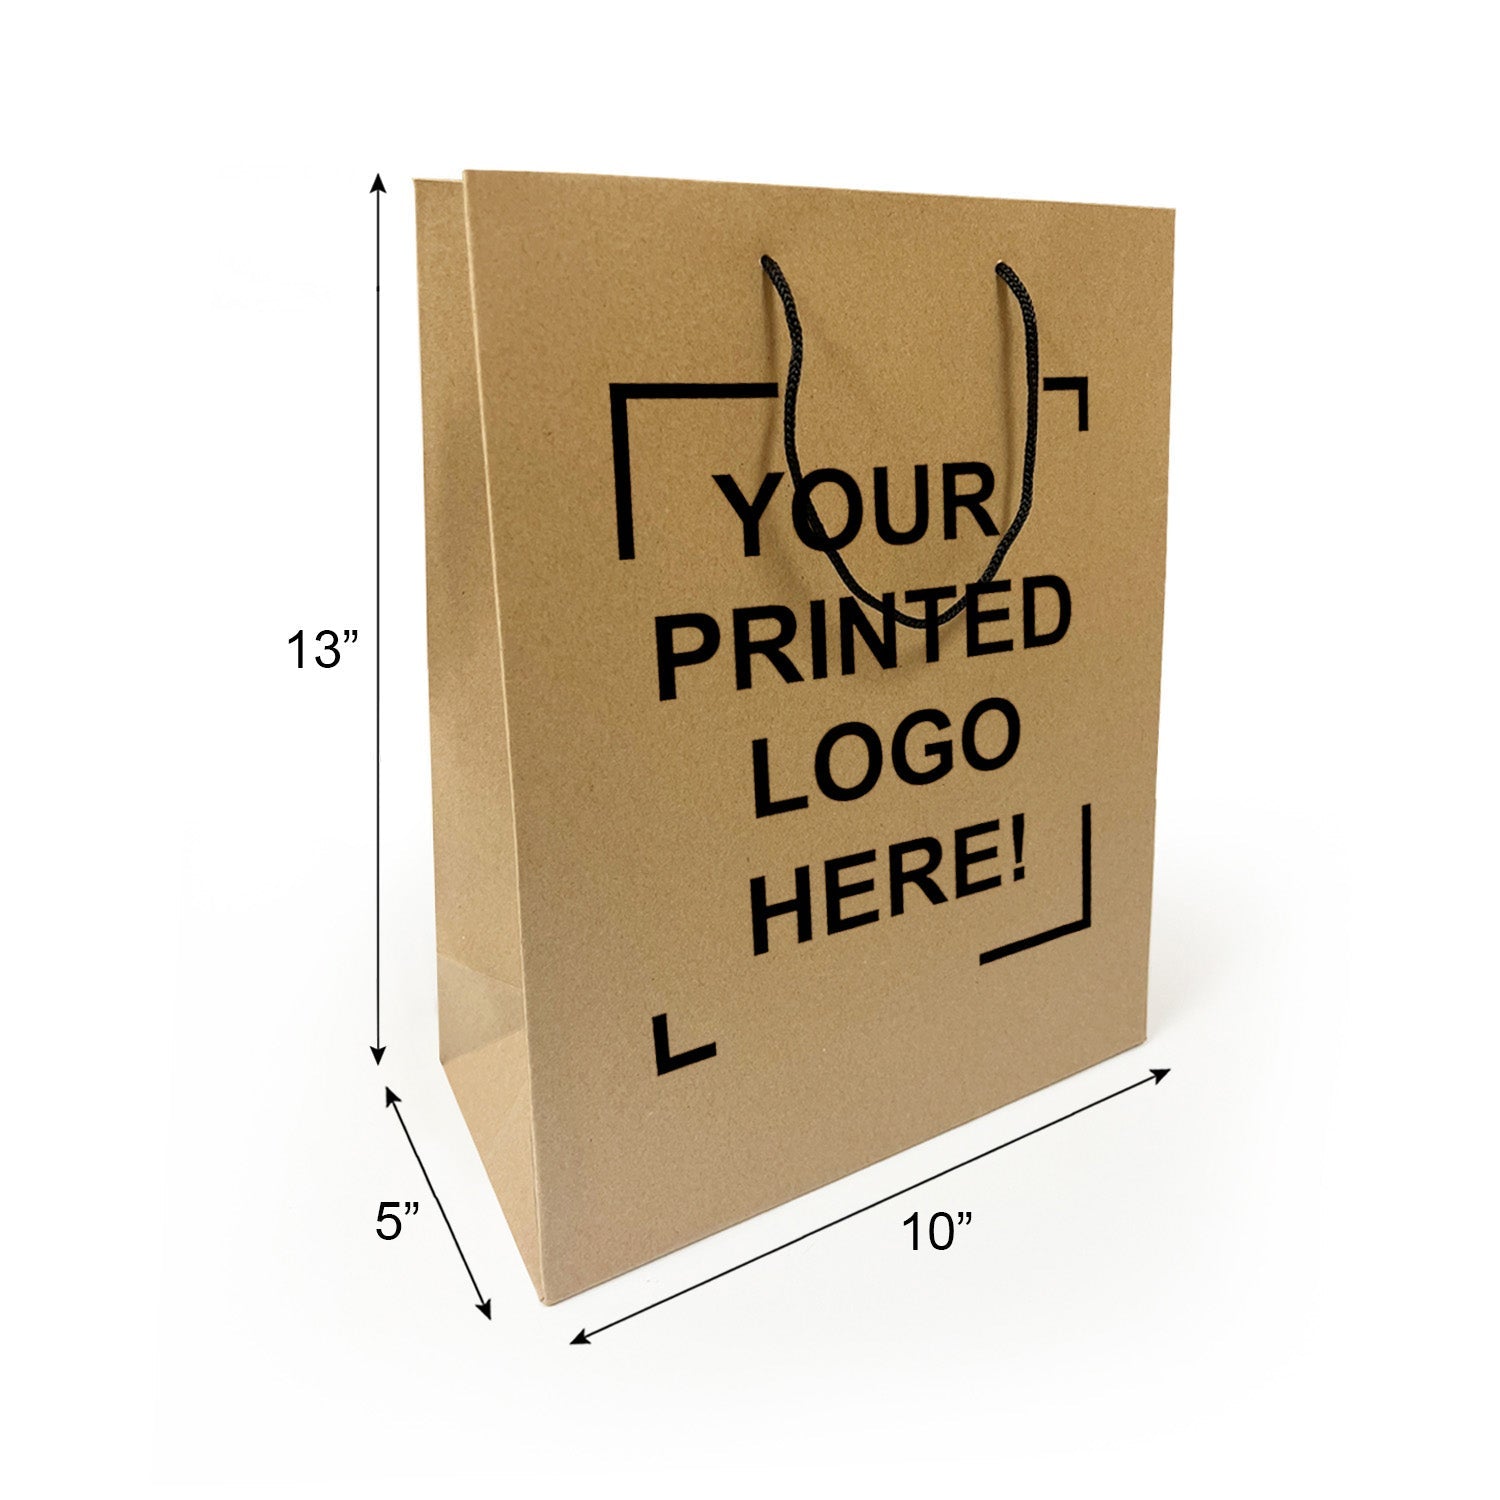 150 Pcs, Debbie, 10x5x13 inches, Kraft Euro Tote Paper Bags, with Rope Handle, Full Color Custom Print